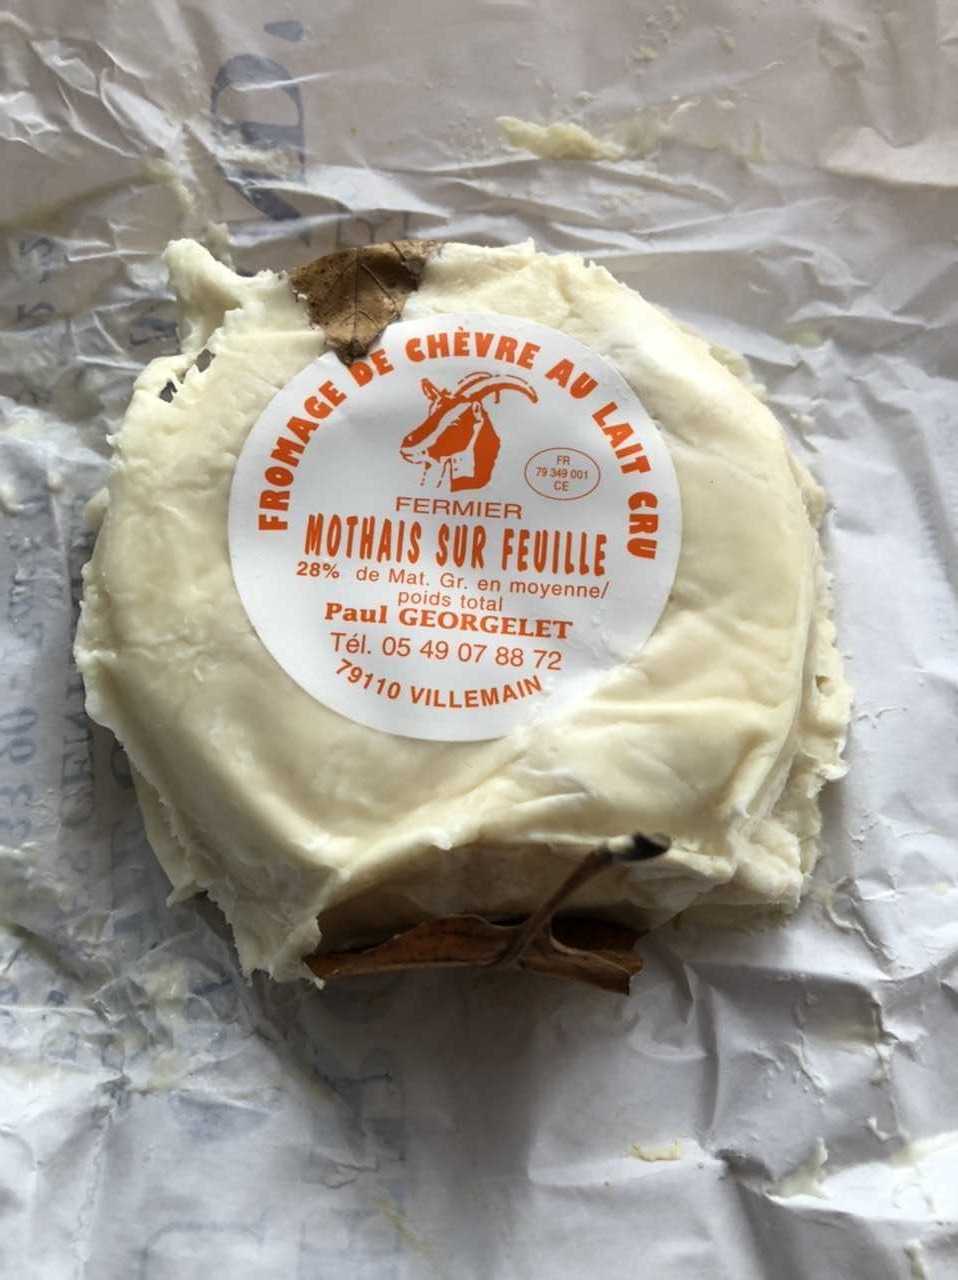 Mothais Sur Feuille Fromagerieを目指してのほほん日記 楽天ブログ 